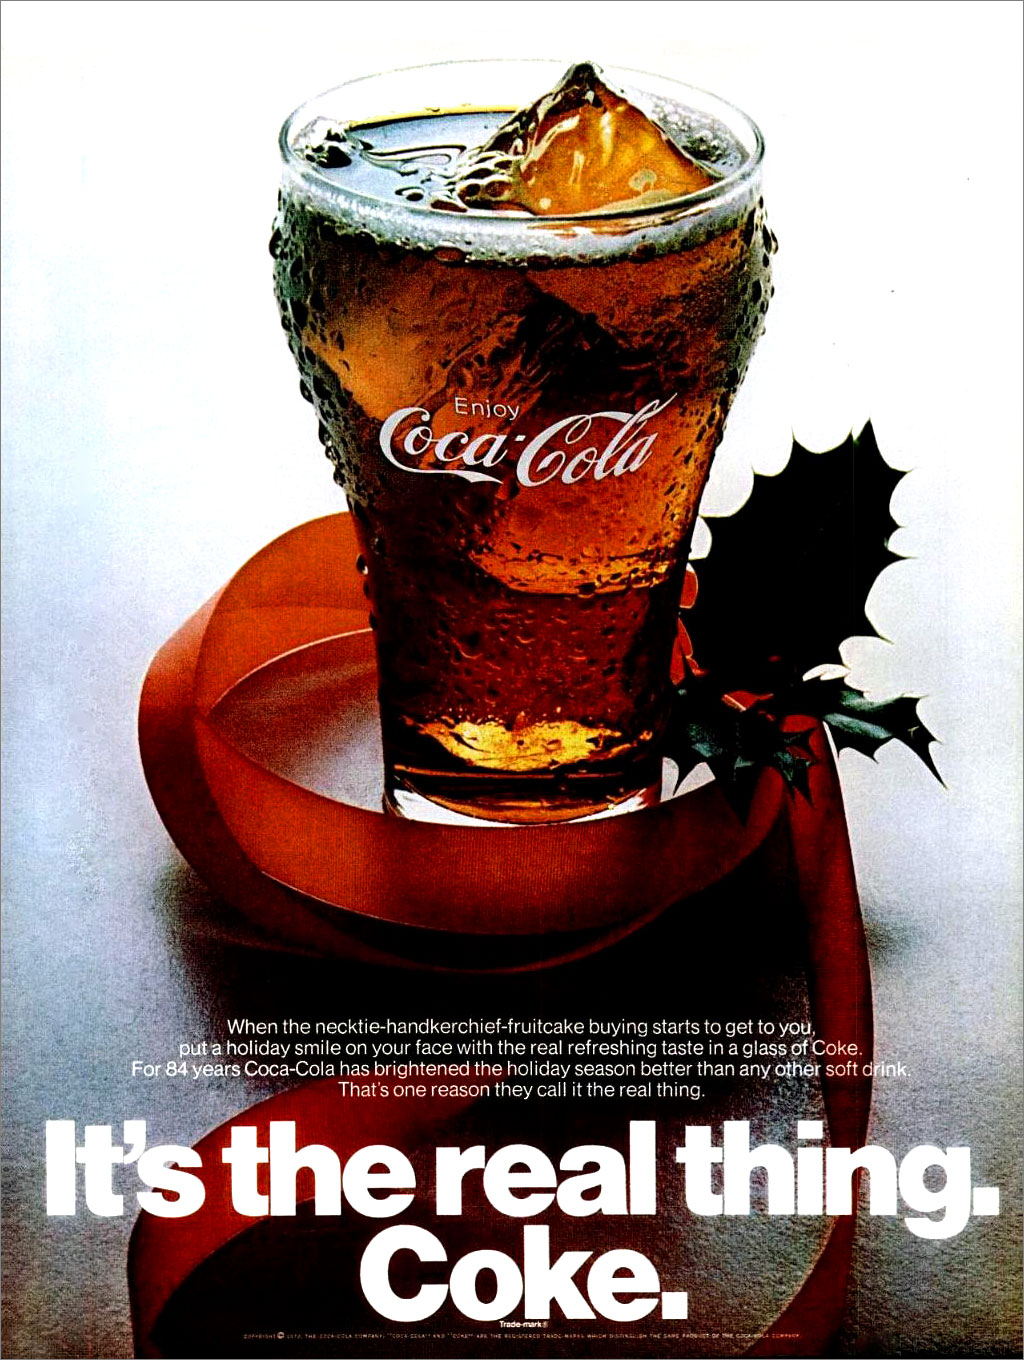 1970-Coke-Is-The-Real-Thing-Coca-Cola-Ad.jpeg